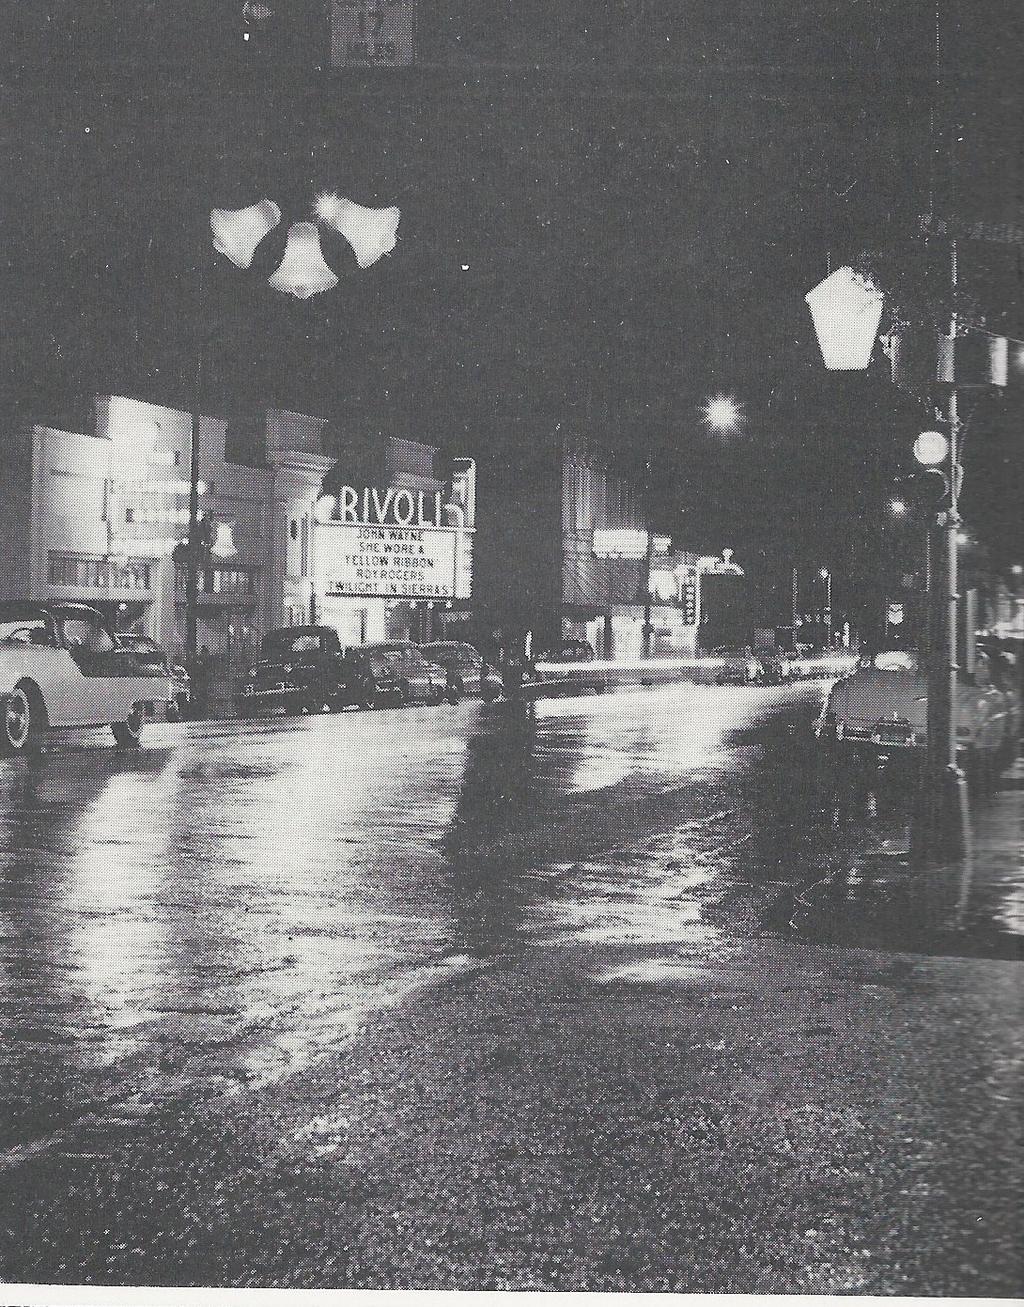 Page 4 Upper left: Rivoli Theater at night when 6th Street was a two-way street. Building is gone. Above: Entry to Josephine County Fairgrounds.